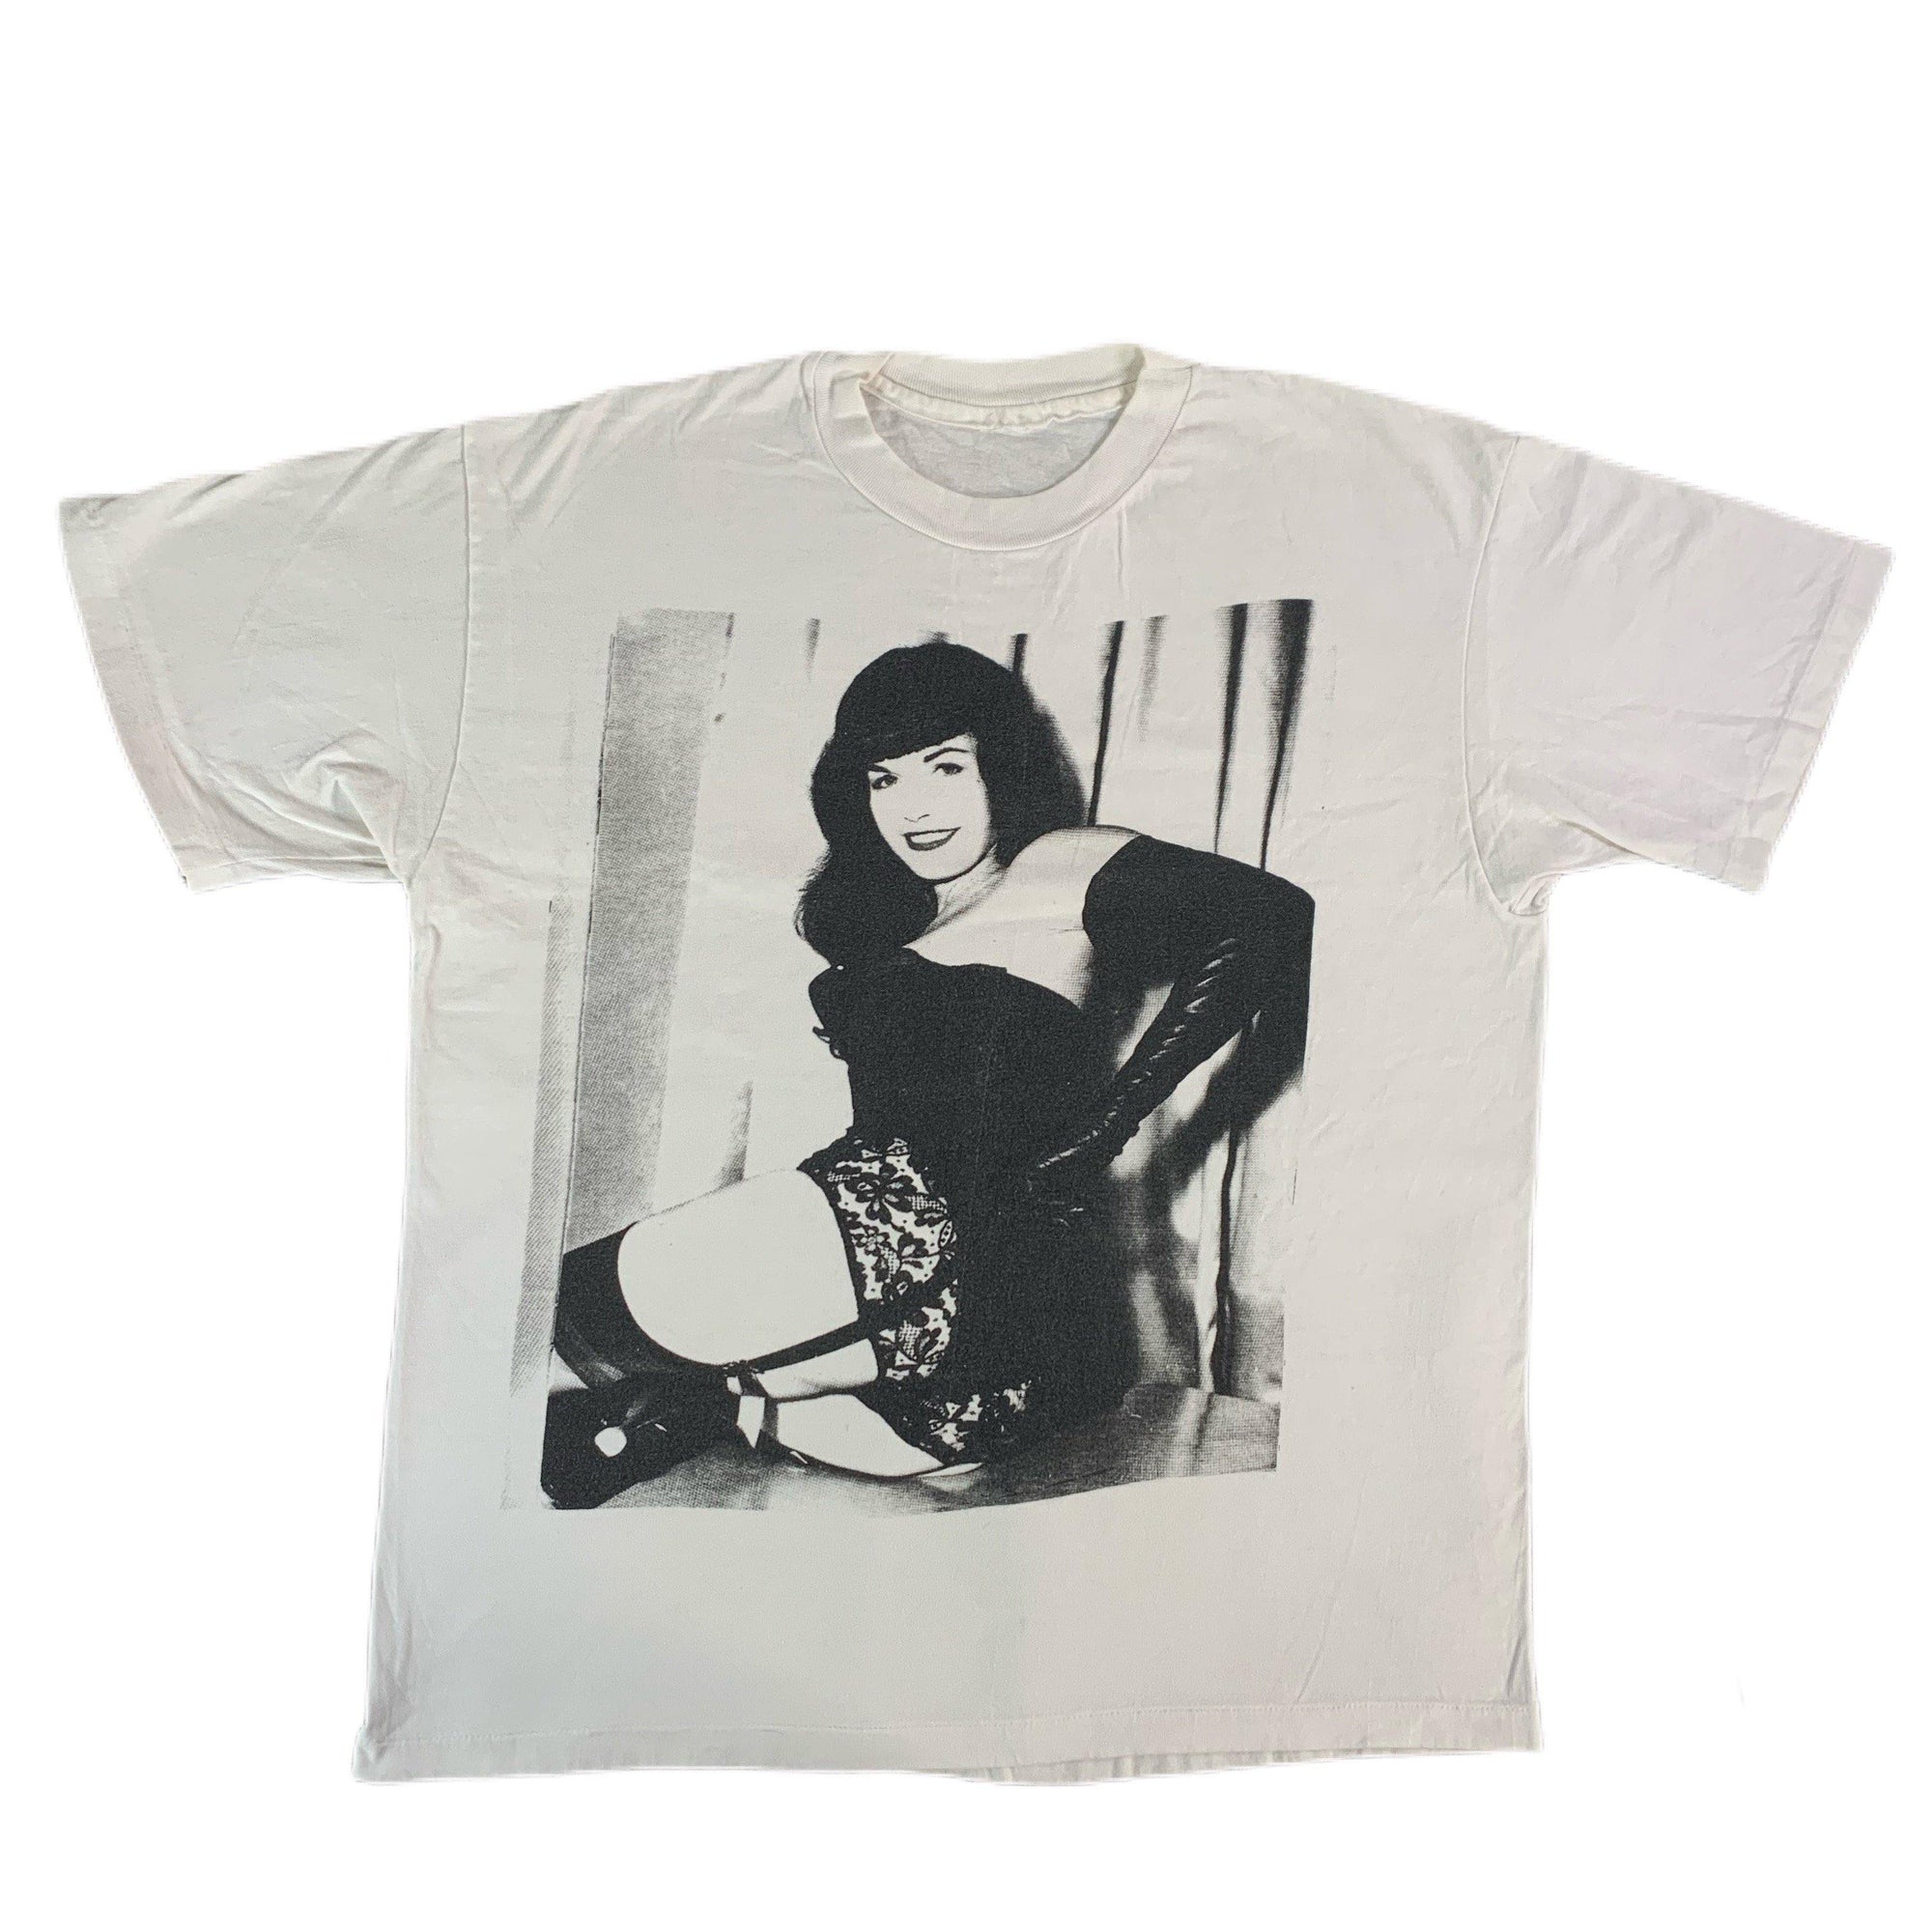 Vintage Bettie Page "Pin-up" T-Shirt - jointcustodydc